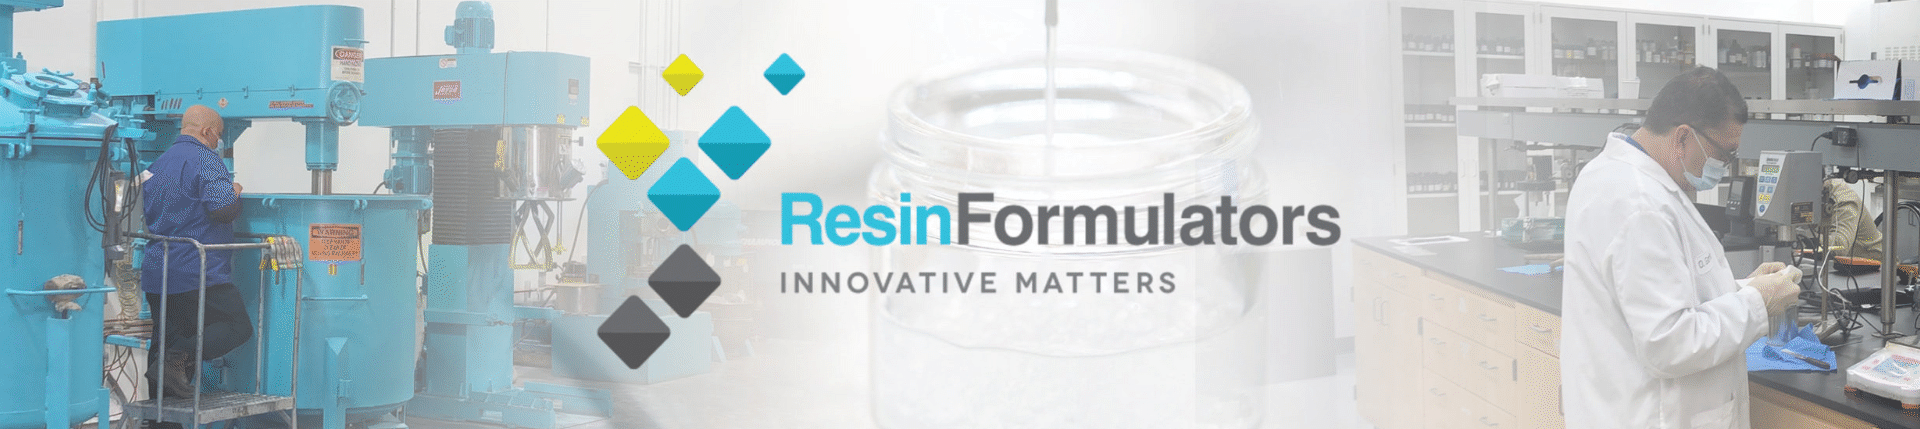 Resin Formulator banner with logo and background image